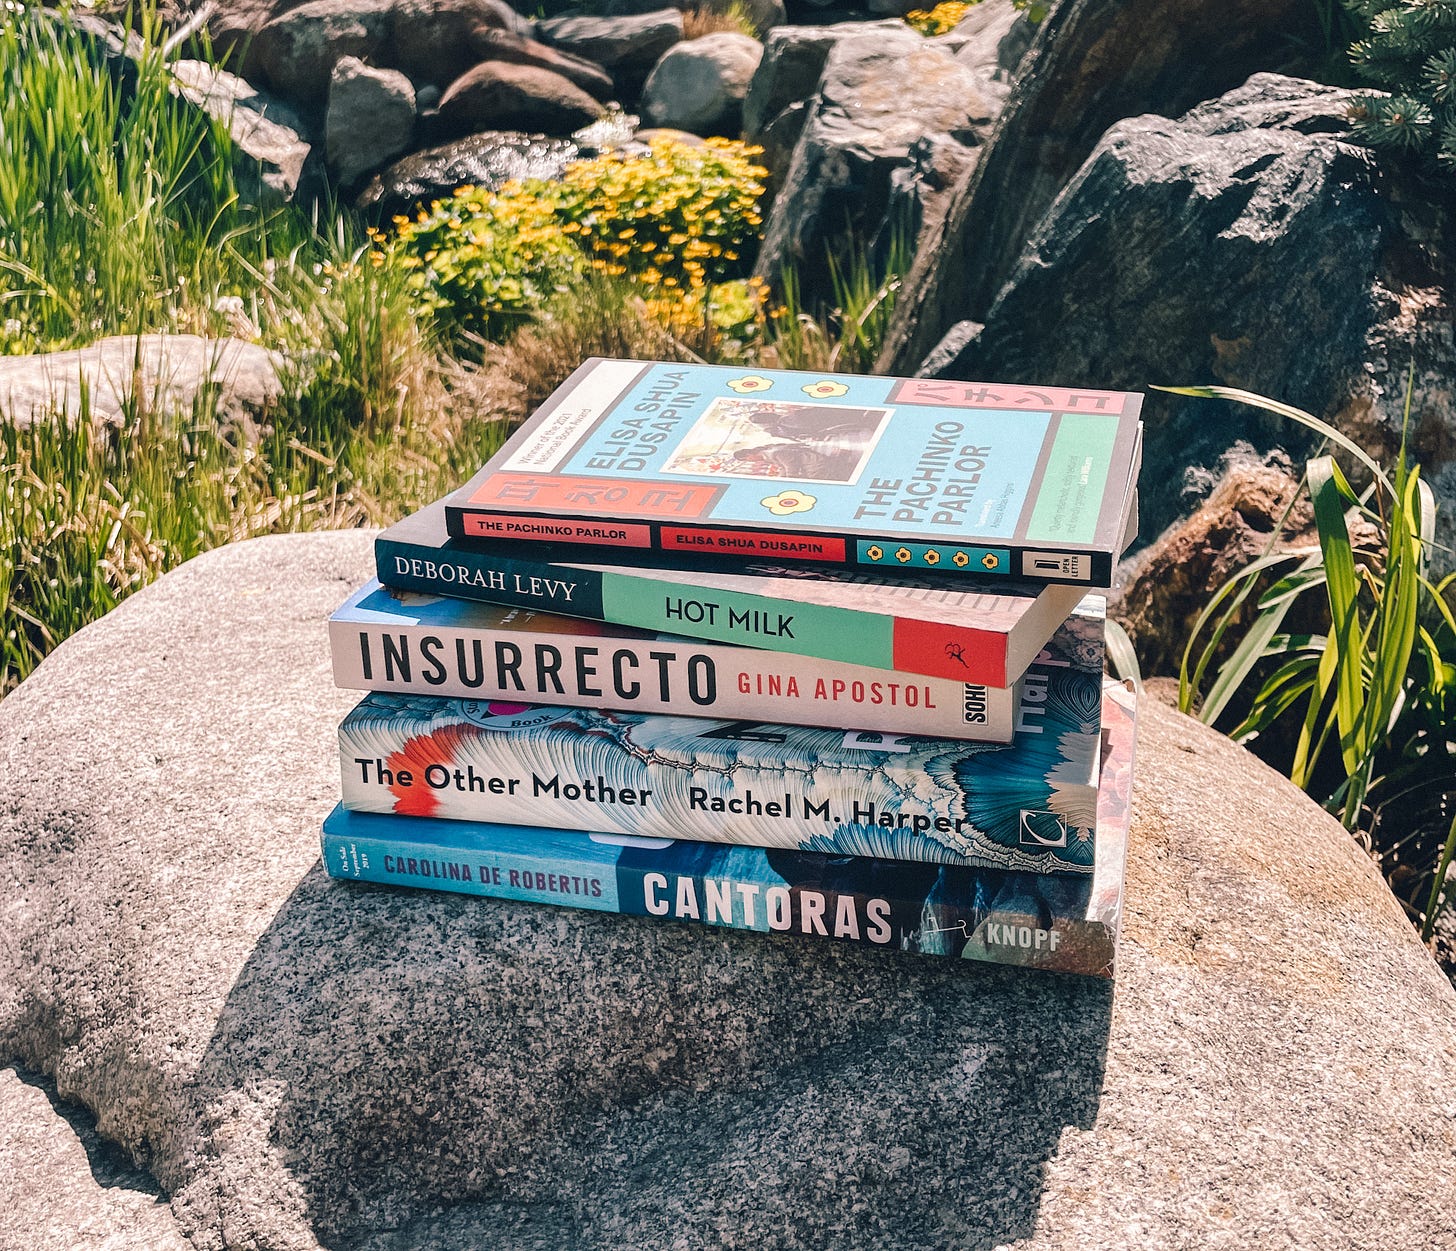 A stack of books sits on a rock amongst a background of blooming flowers. The stack includes: The Pachinko Parlor, Hot Milk, Insurrecto, The Other Mother, and Cantoras.